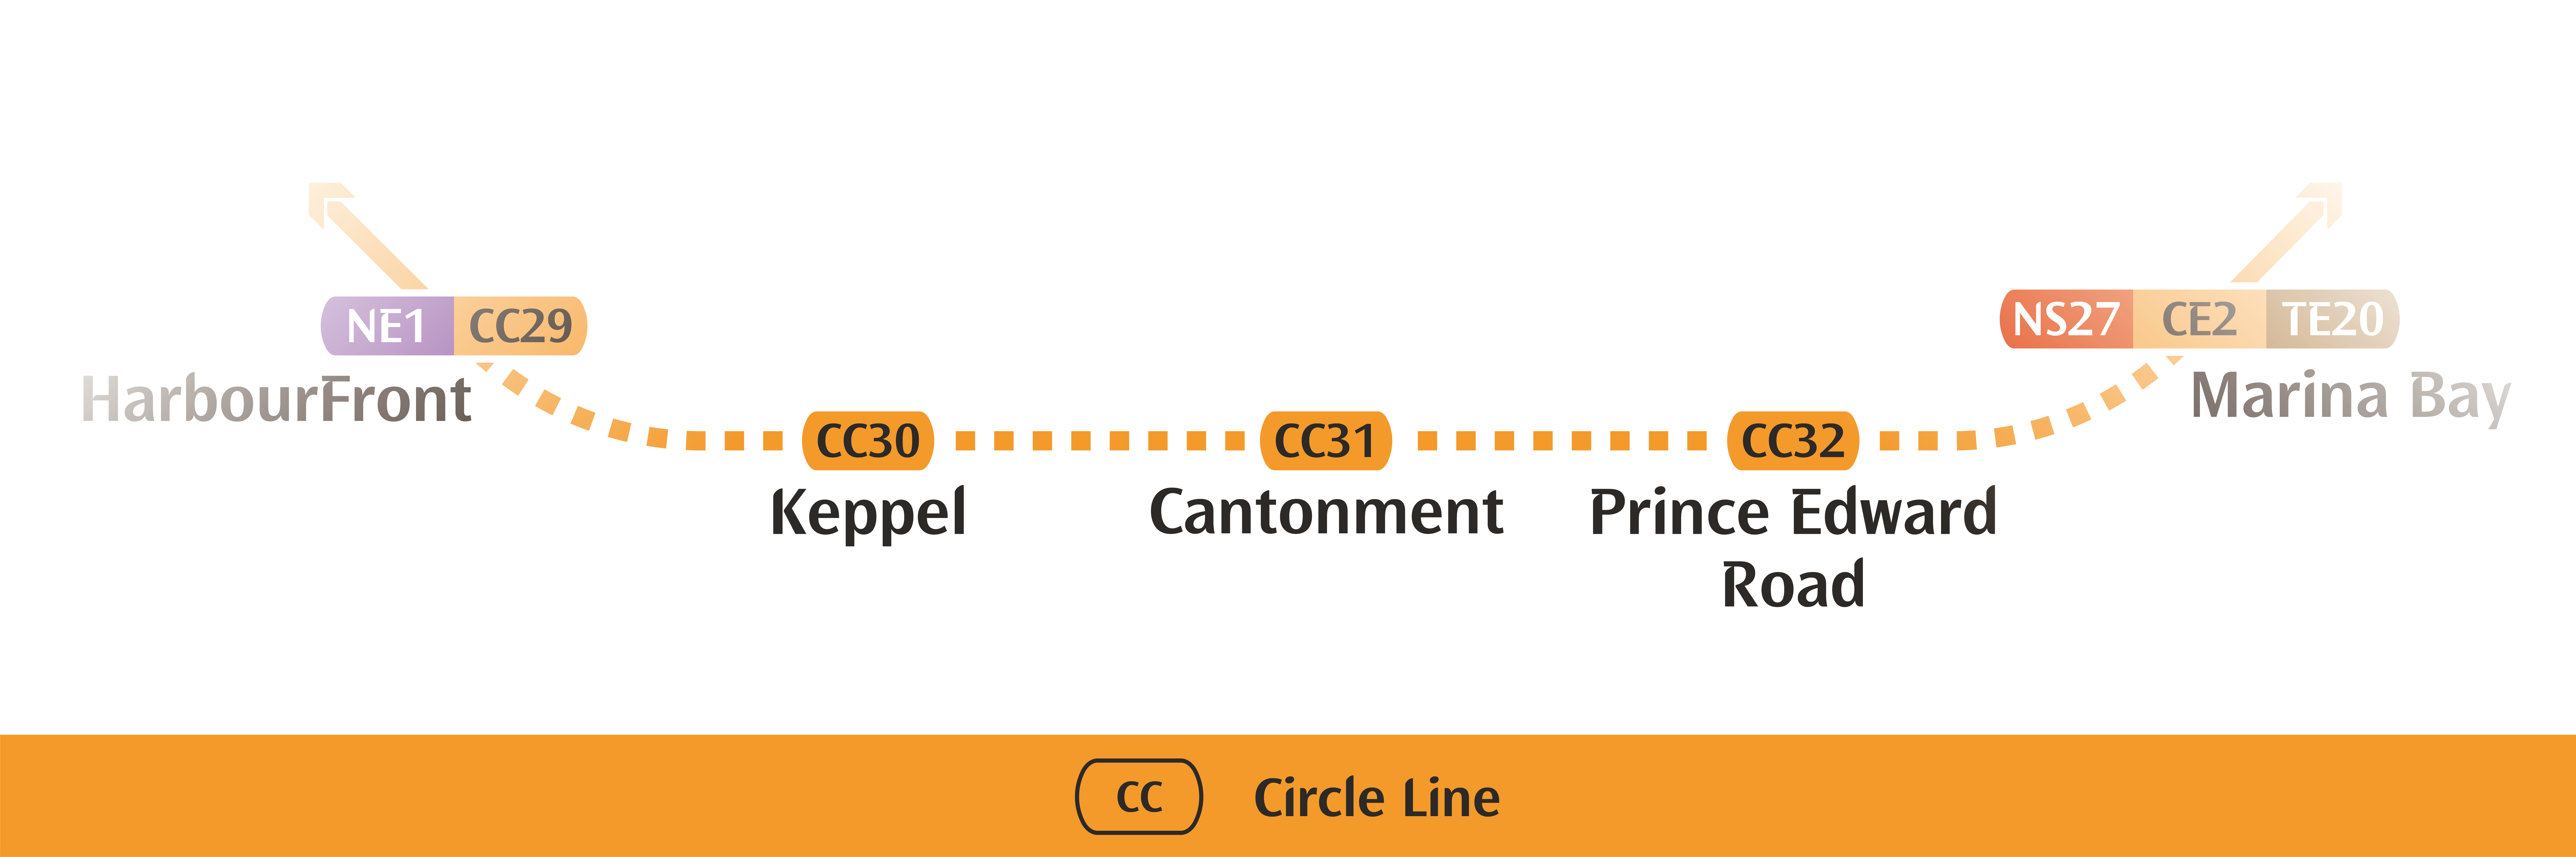 System of Circle Line 6